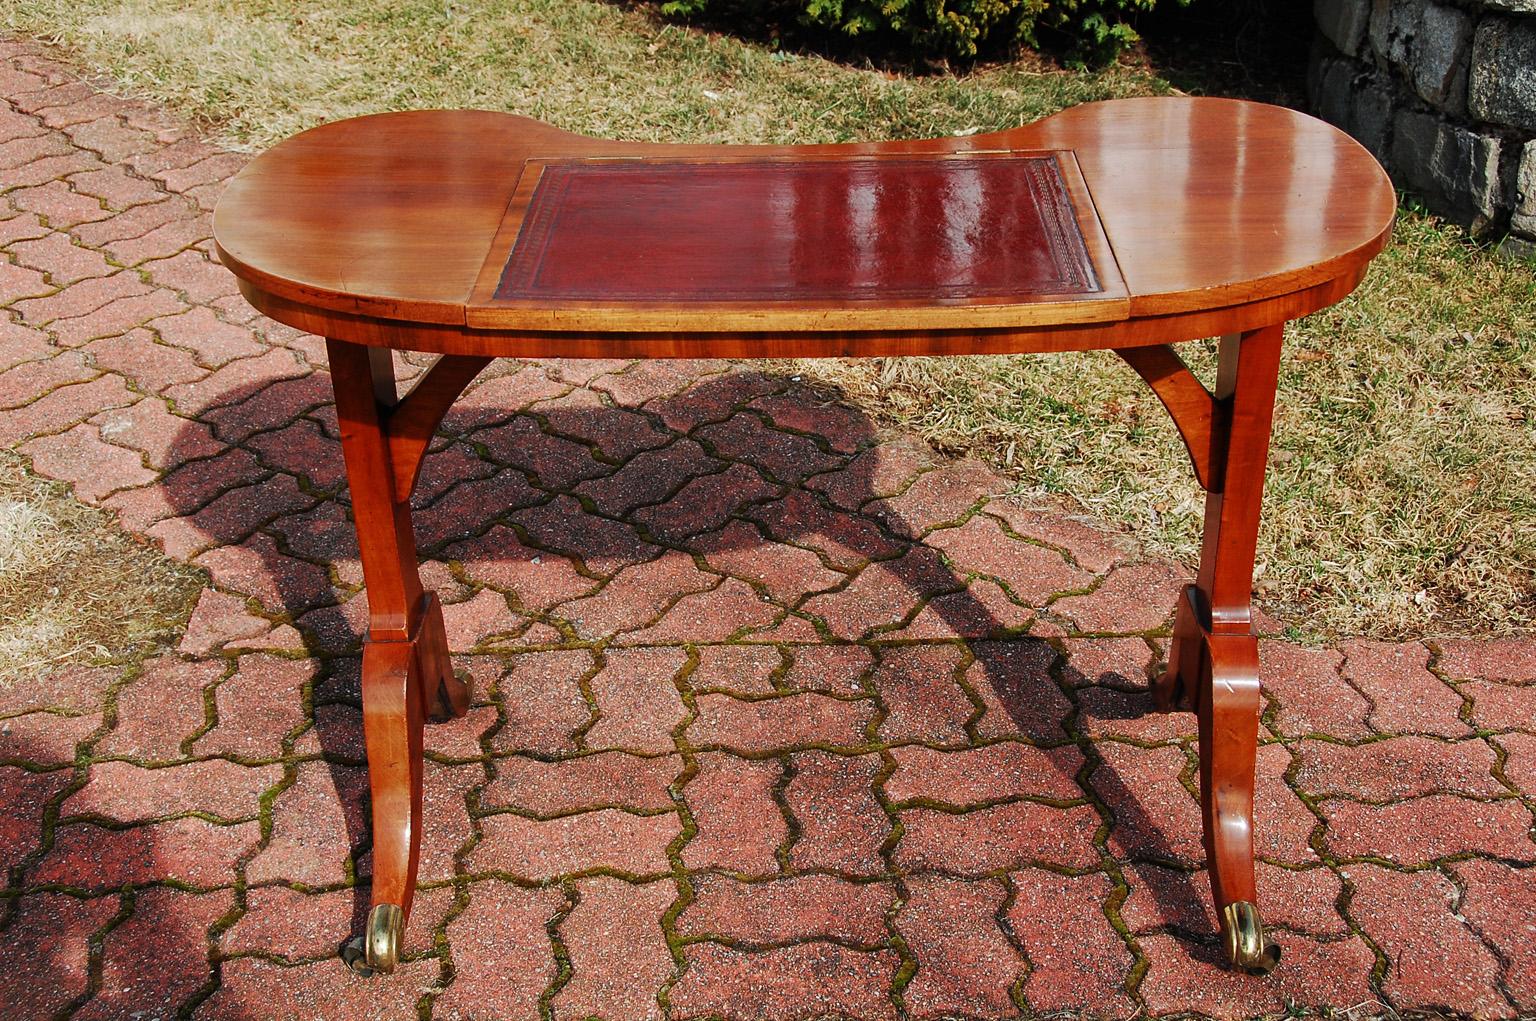 English Regency period satinwood kidney shaped writing table with pedestal ends and saber legs ending in brass casters. This elegant writing table has a hinged writing surface with inlaid hand tooled and hand dyed older red leather in excellent